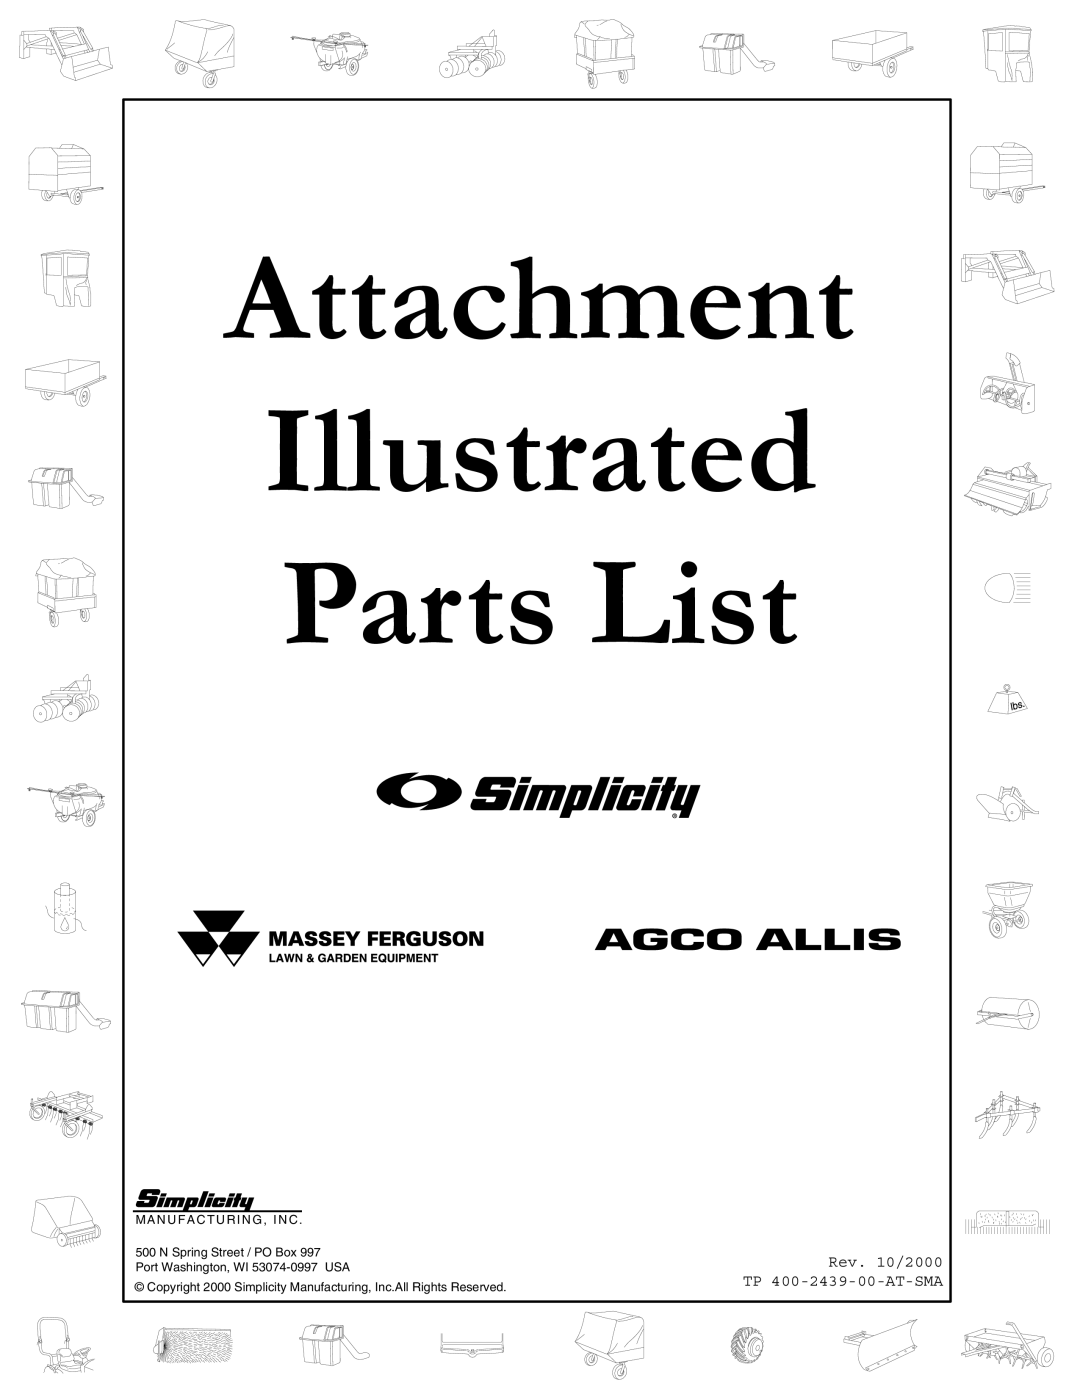 Snapper manual Attachment Illustrated Parts List, Rev. 10/2000 TP 400-2439-00-AT-SMA, M A N U F A C T U R I N G , I N C 